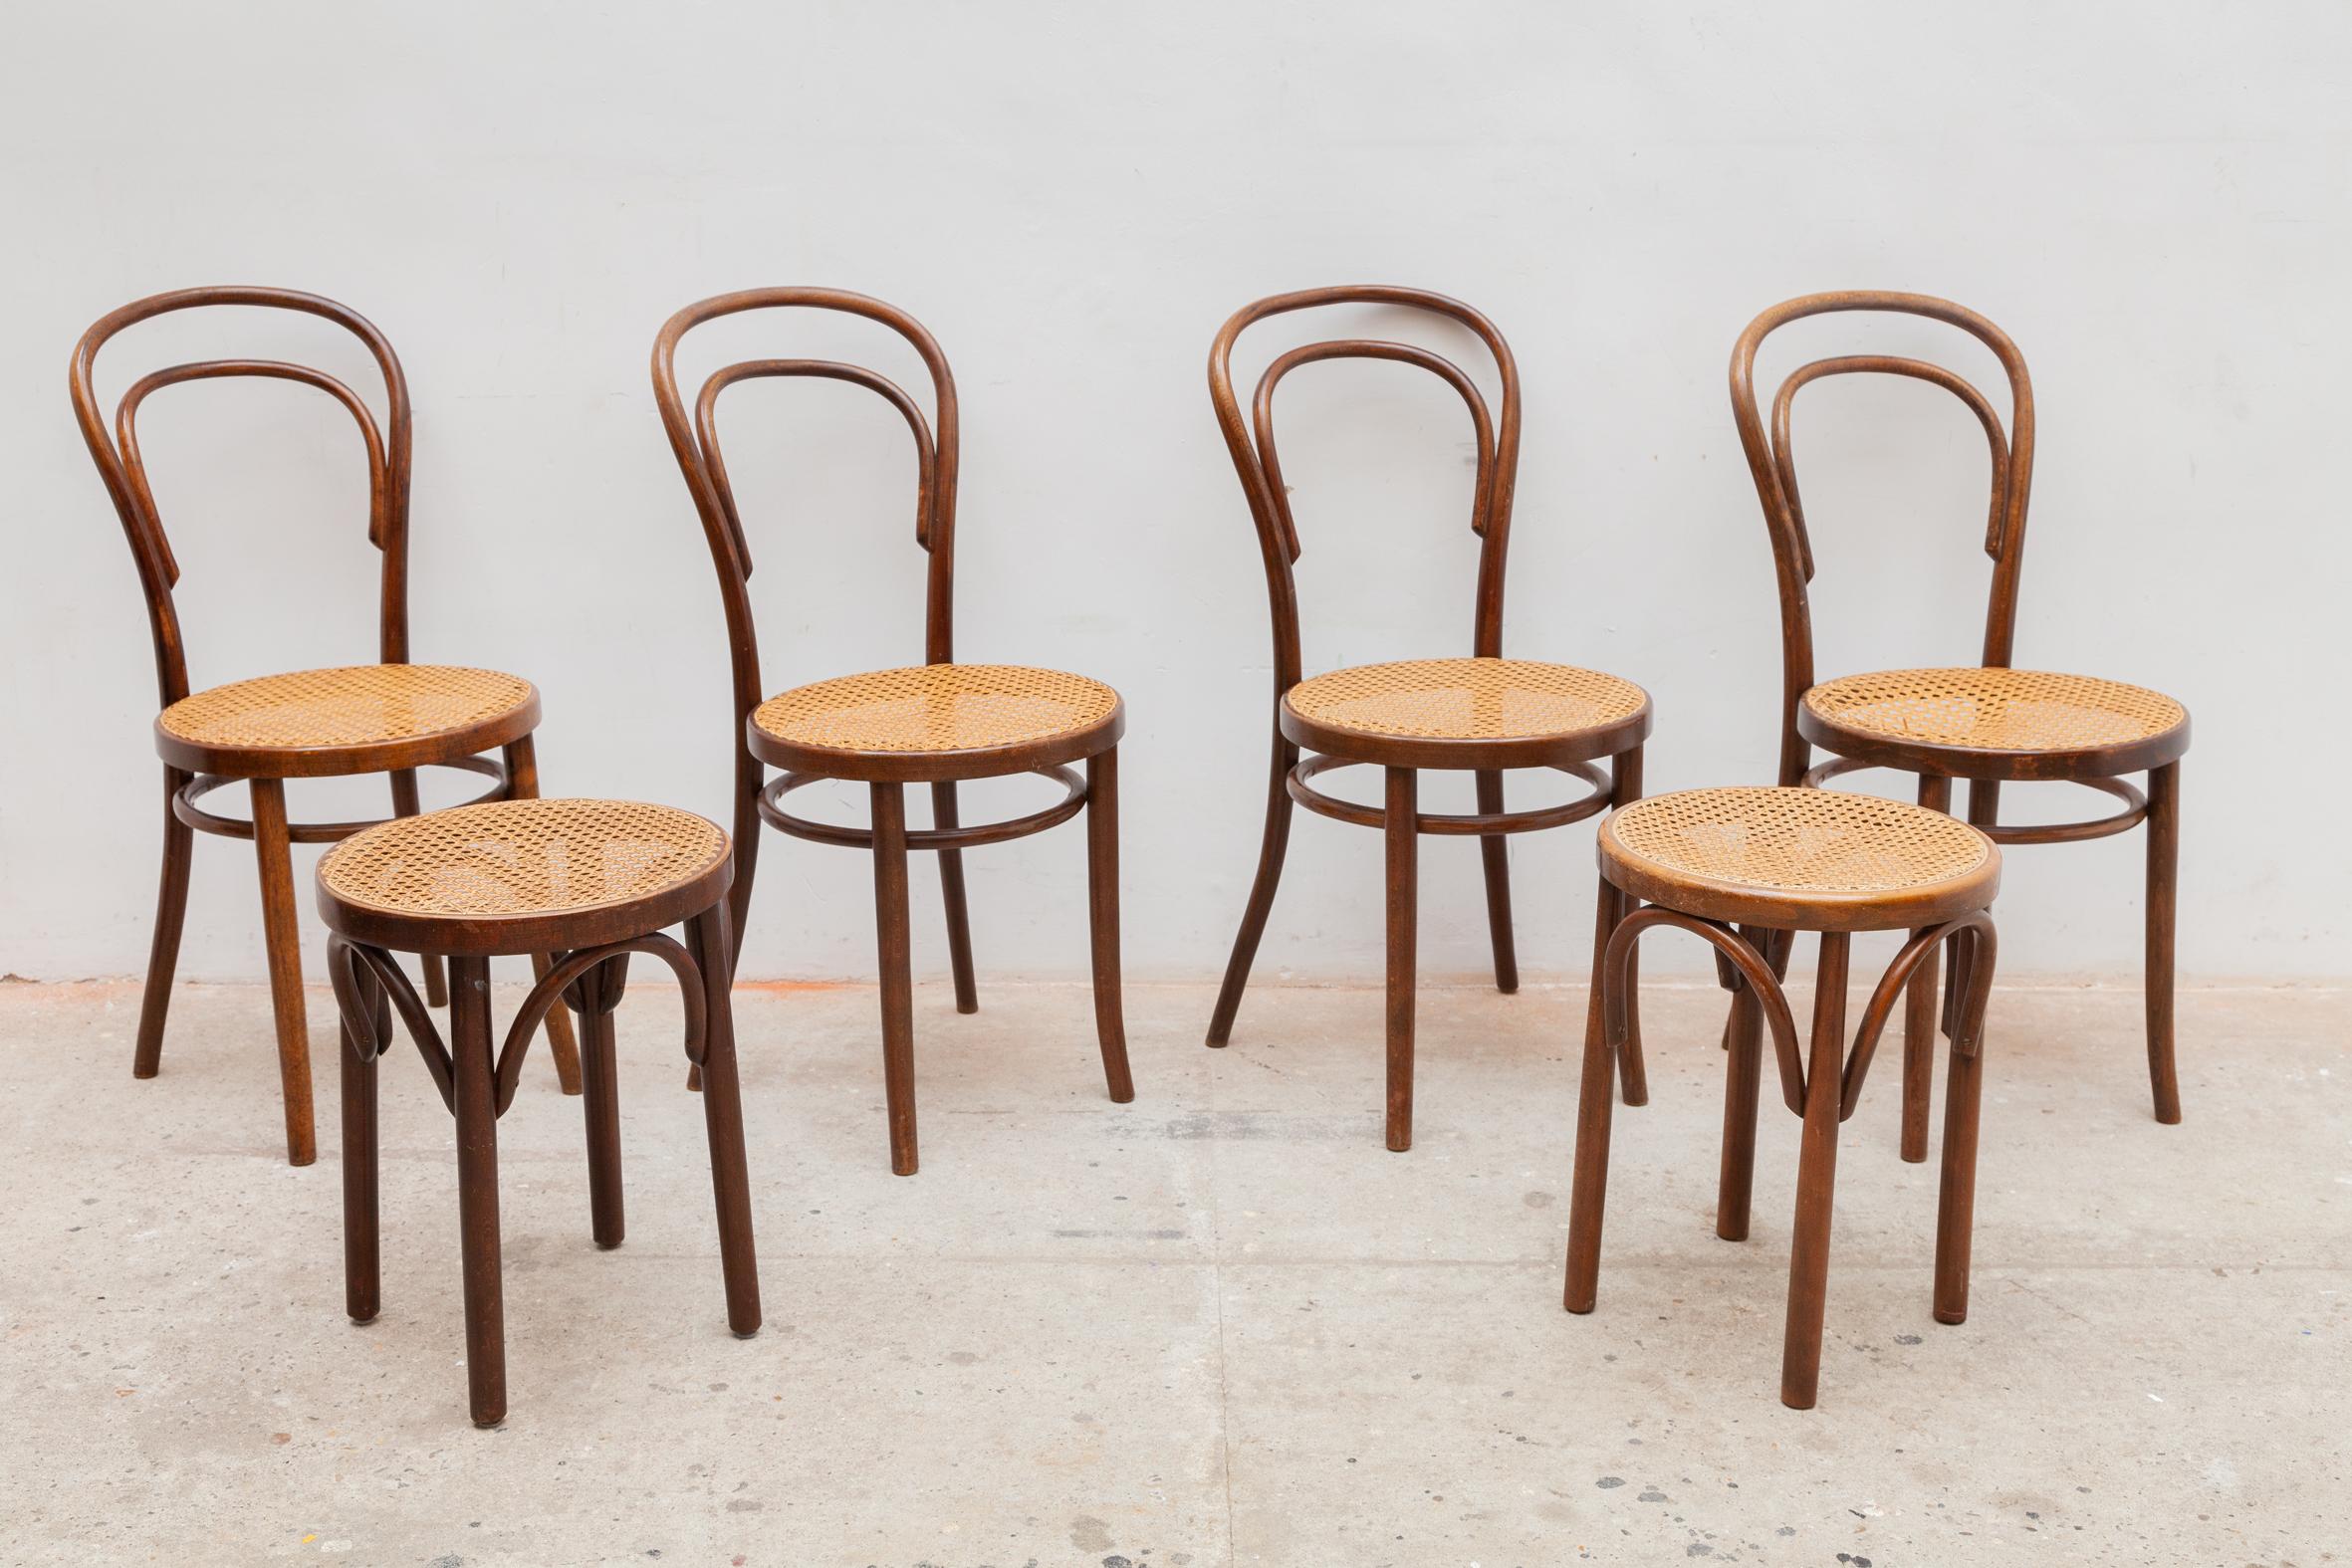 Belle Époque Thonet Set of Four No.14 Chairs and Two Stools, 1930s, Austria